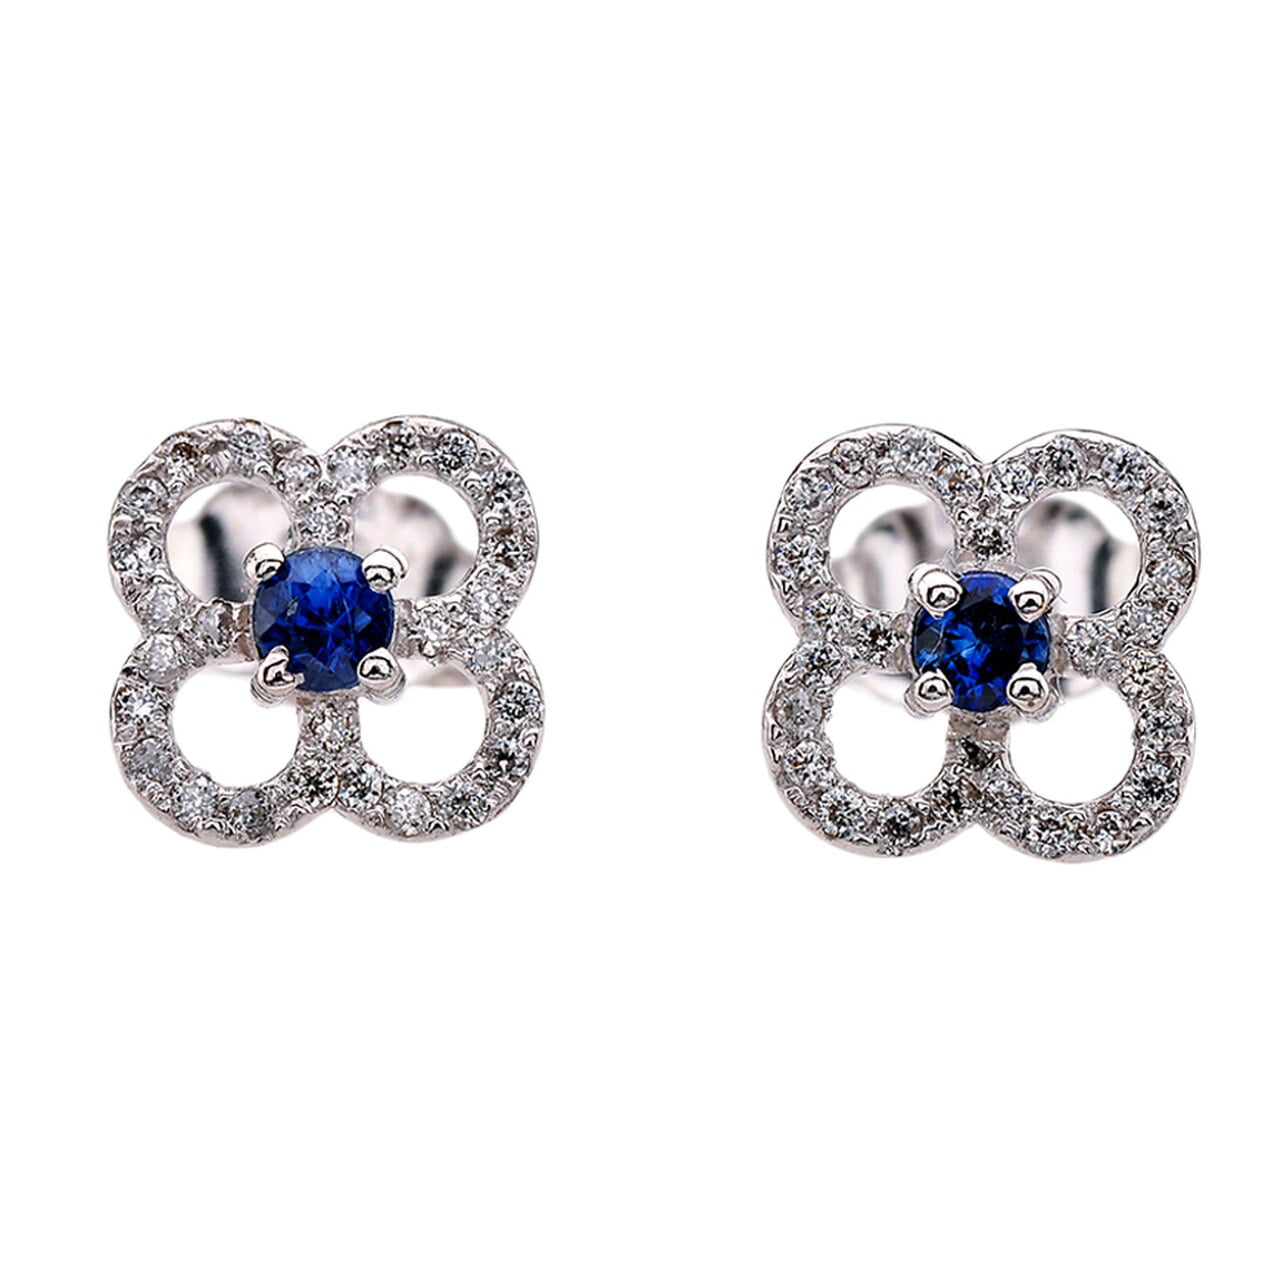 14k White Gold Over 2Ct Round Cut Diamond Clover Four Leaf Stud Women's  Earrings Fashion ME2409930